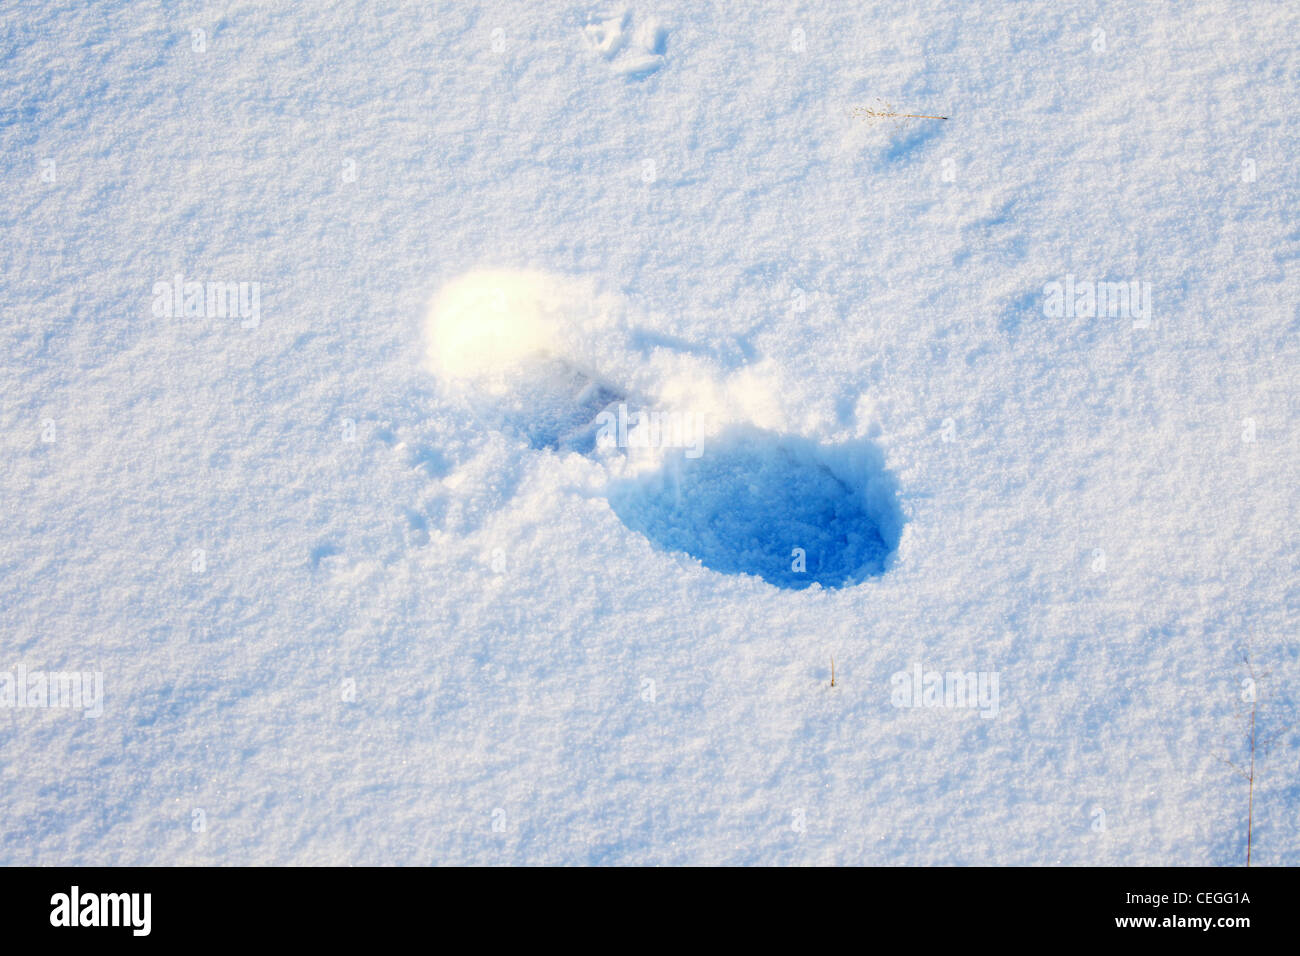 Single footprint in the now Stock Photo